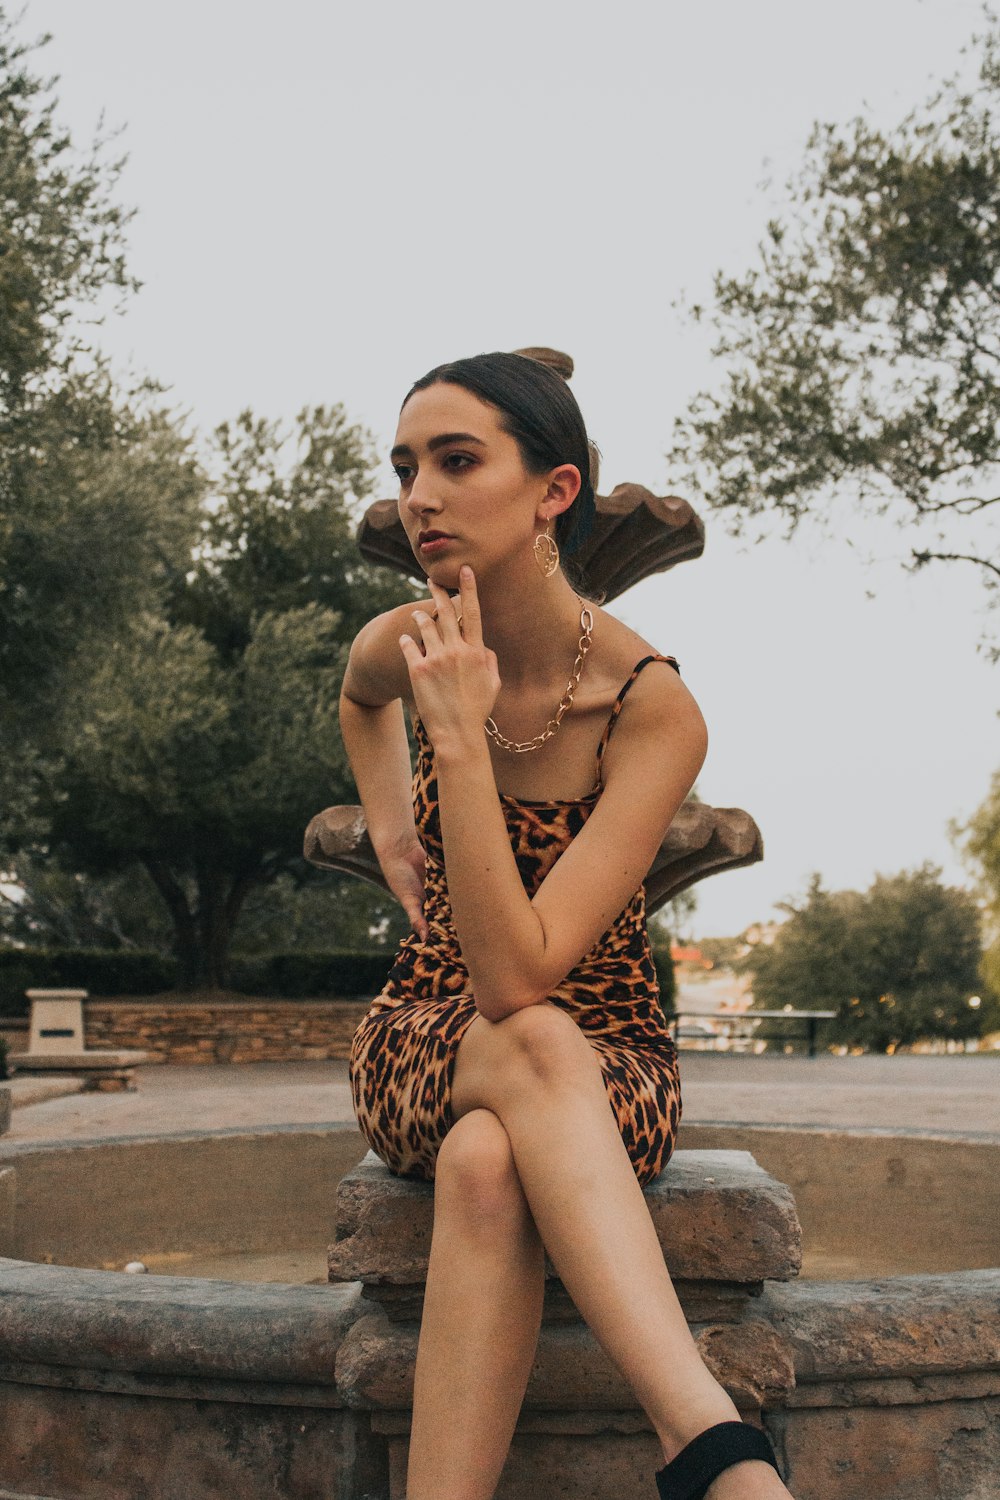 woman in leopard print dress sitting on concrete bench during daytime